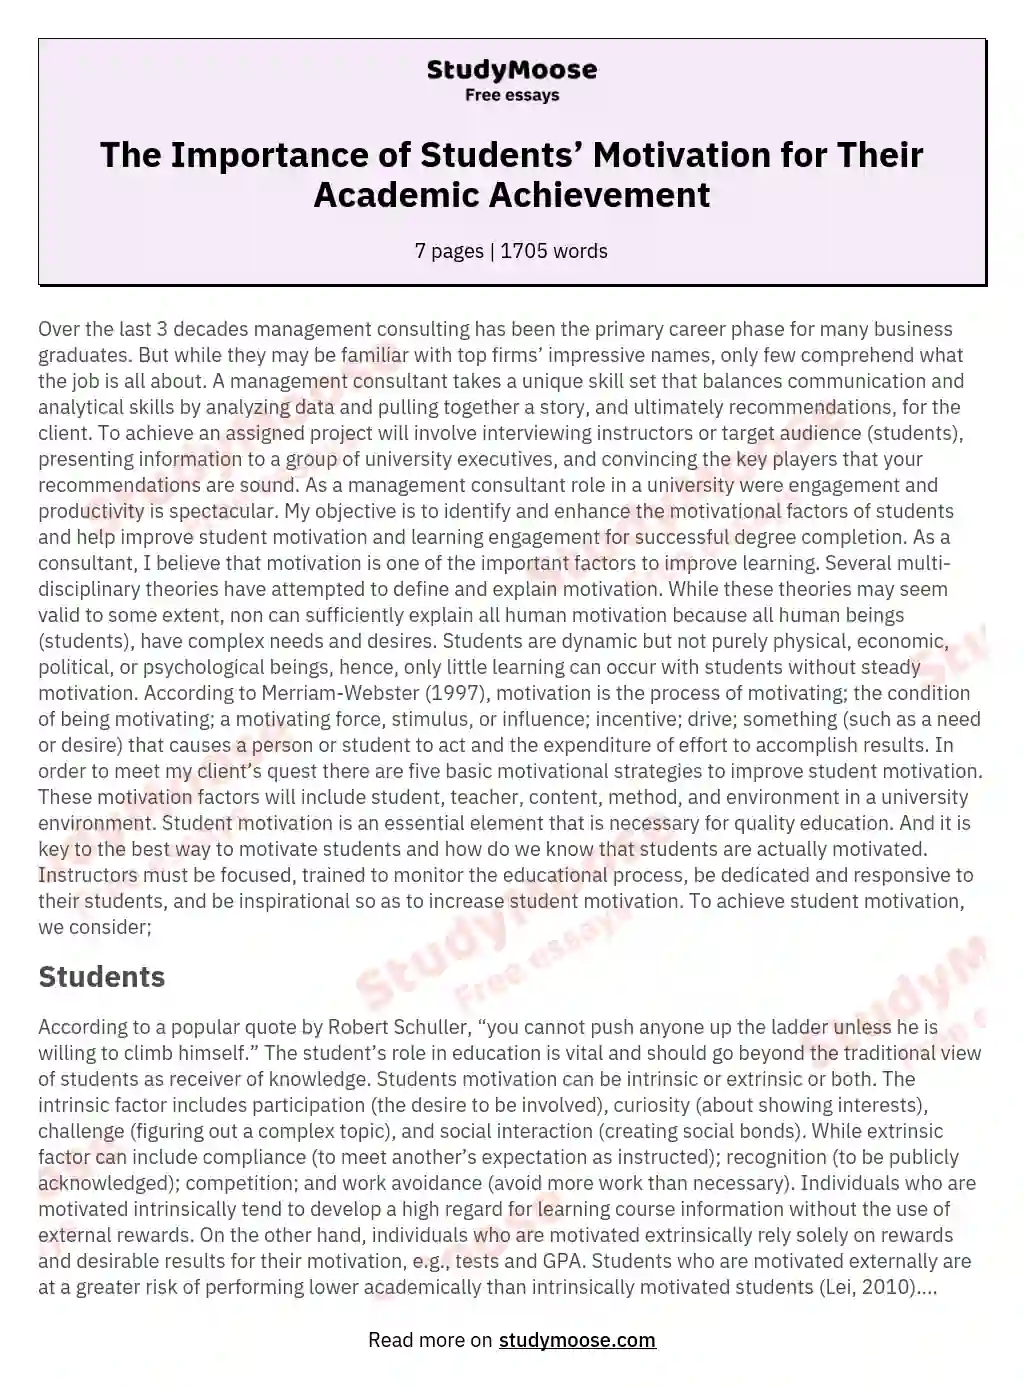 The Importance of Students’ Motivation for Their Academic Achievement